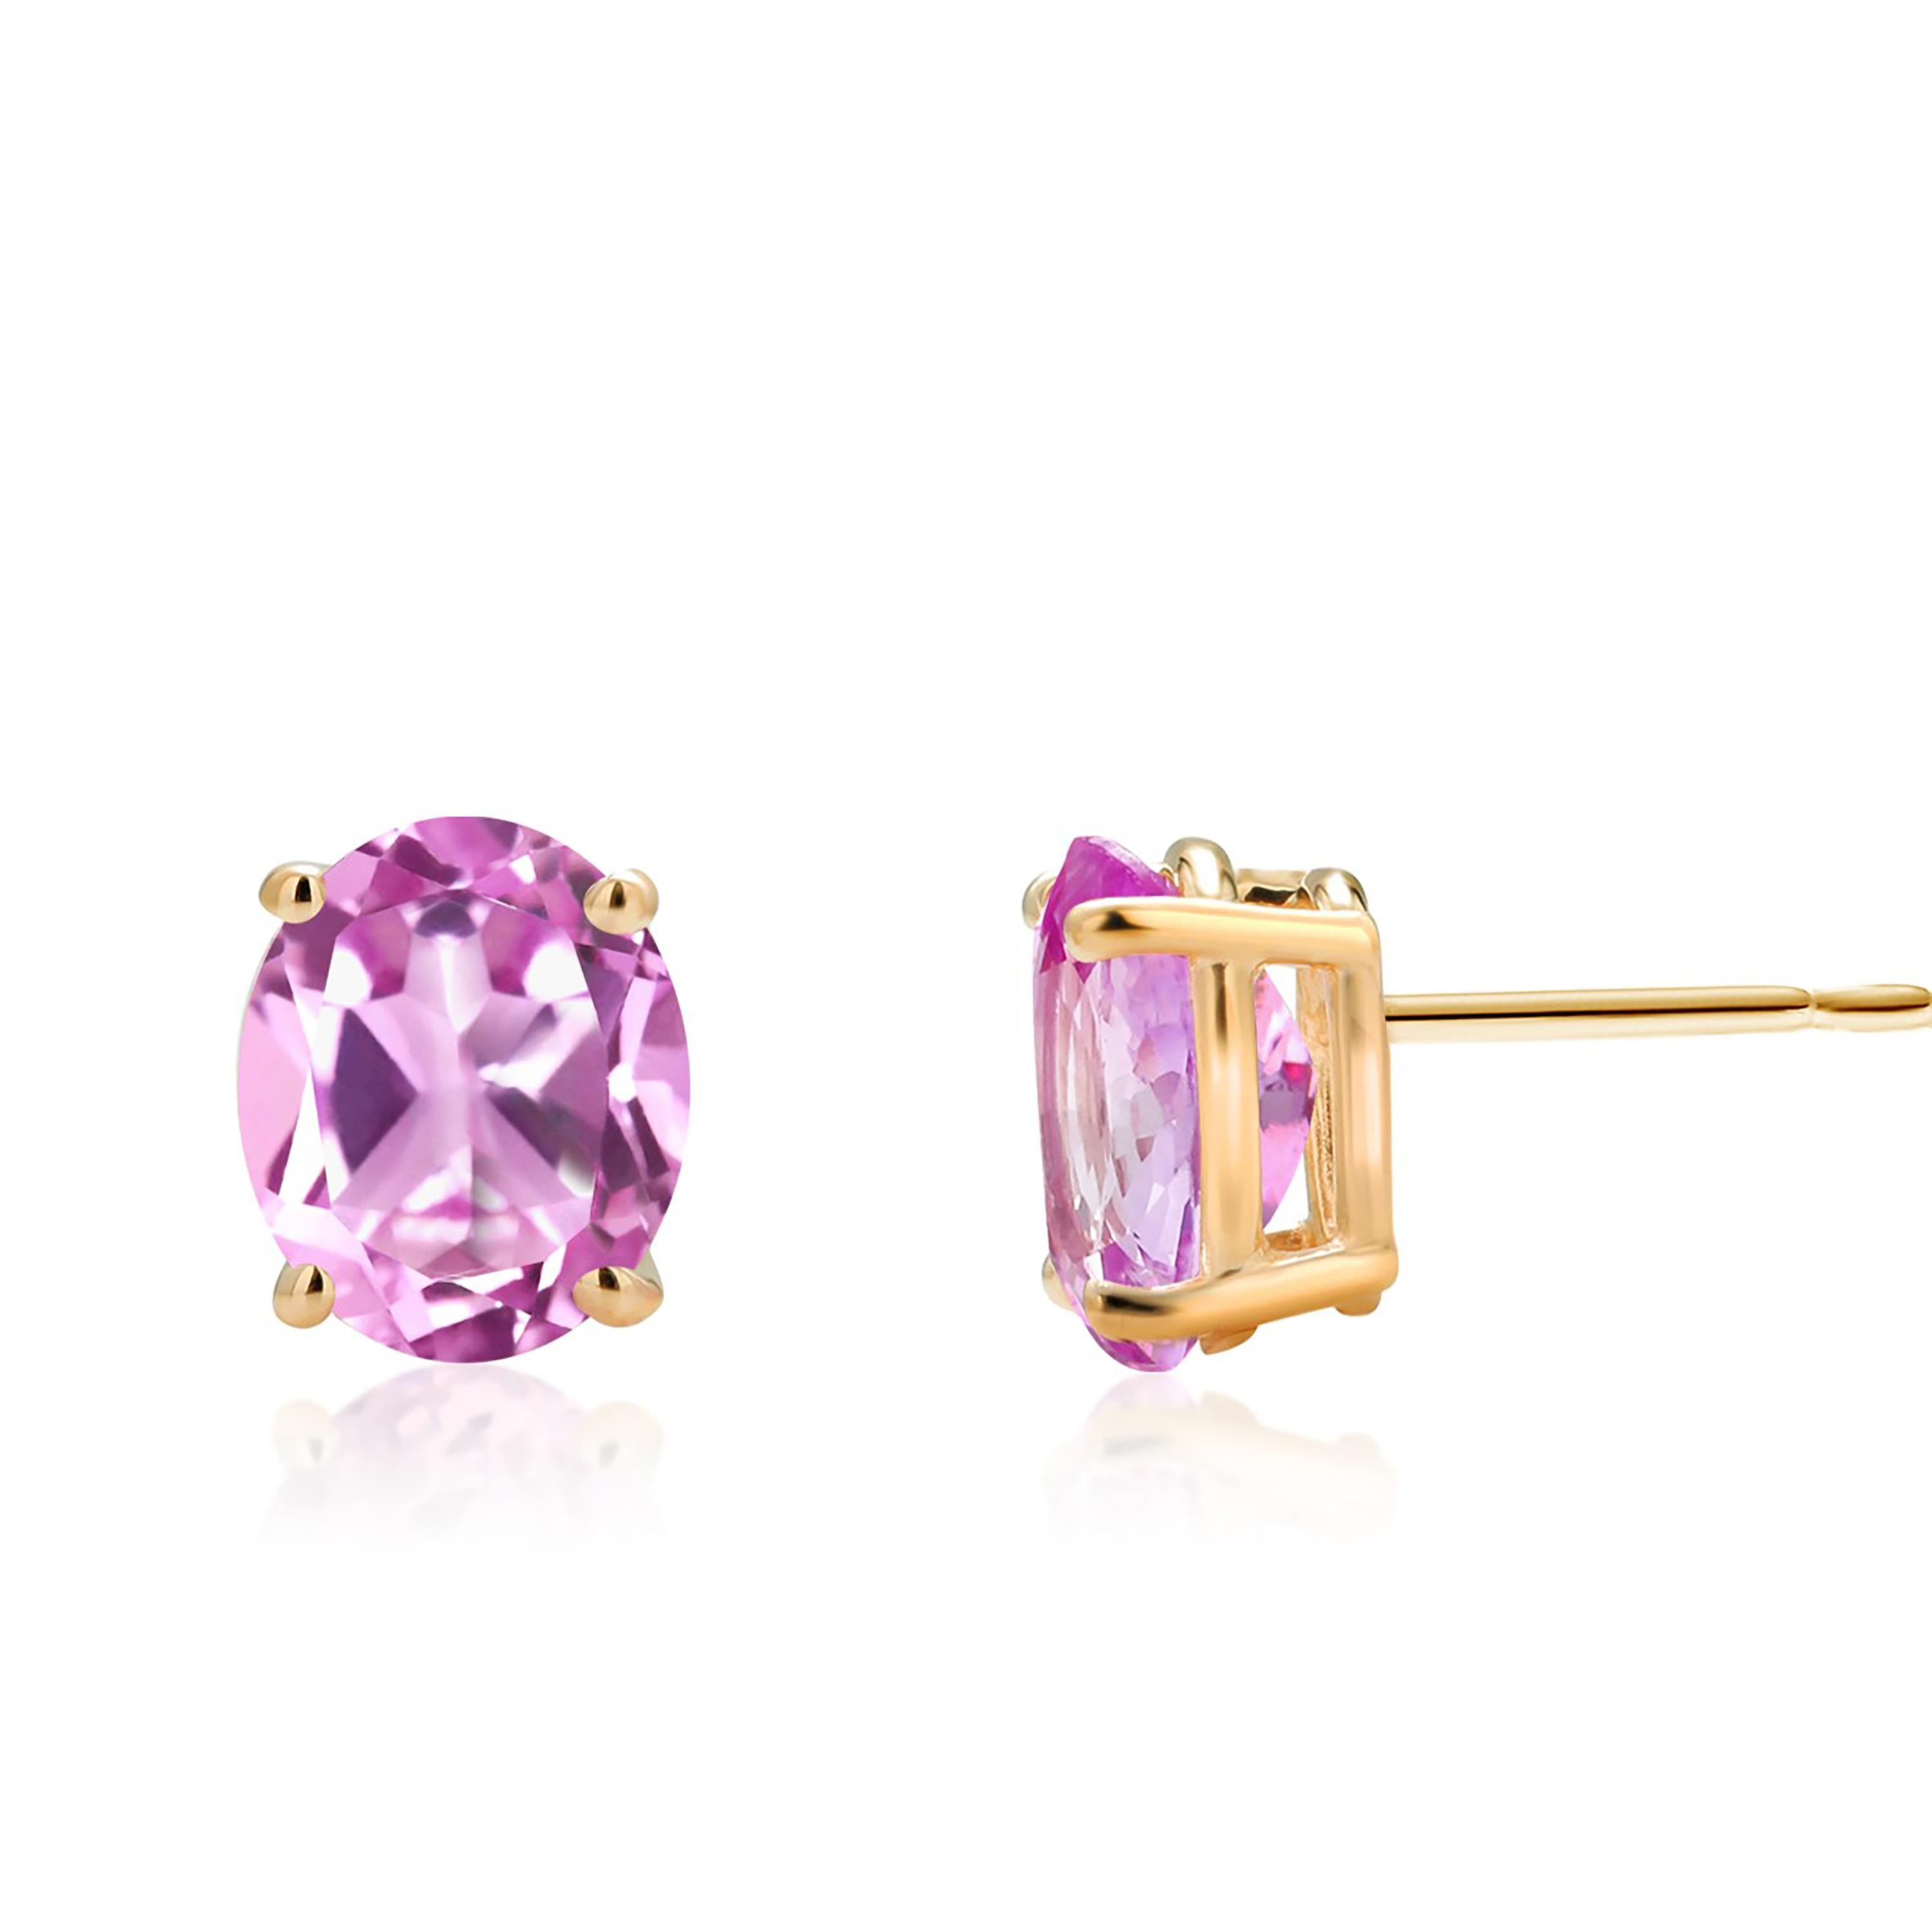 Oval Shaped Mini Ceylon Pink Sapphires Set in Yellow Gold Stud Earrings For Sale